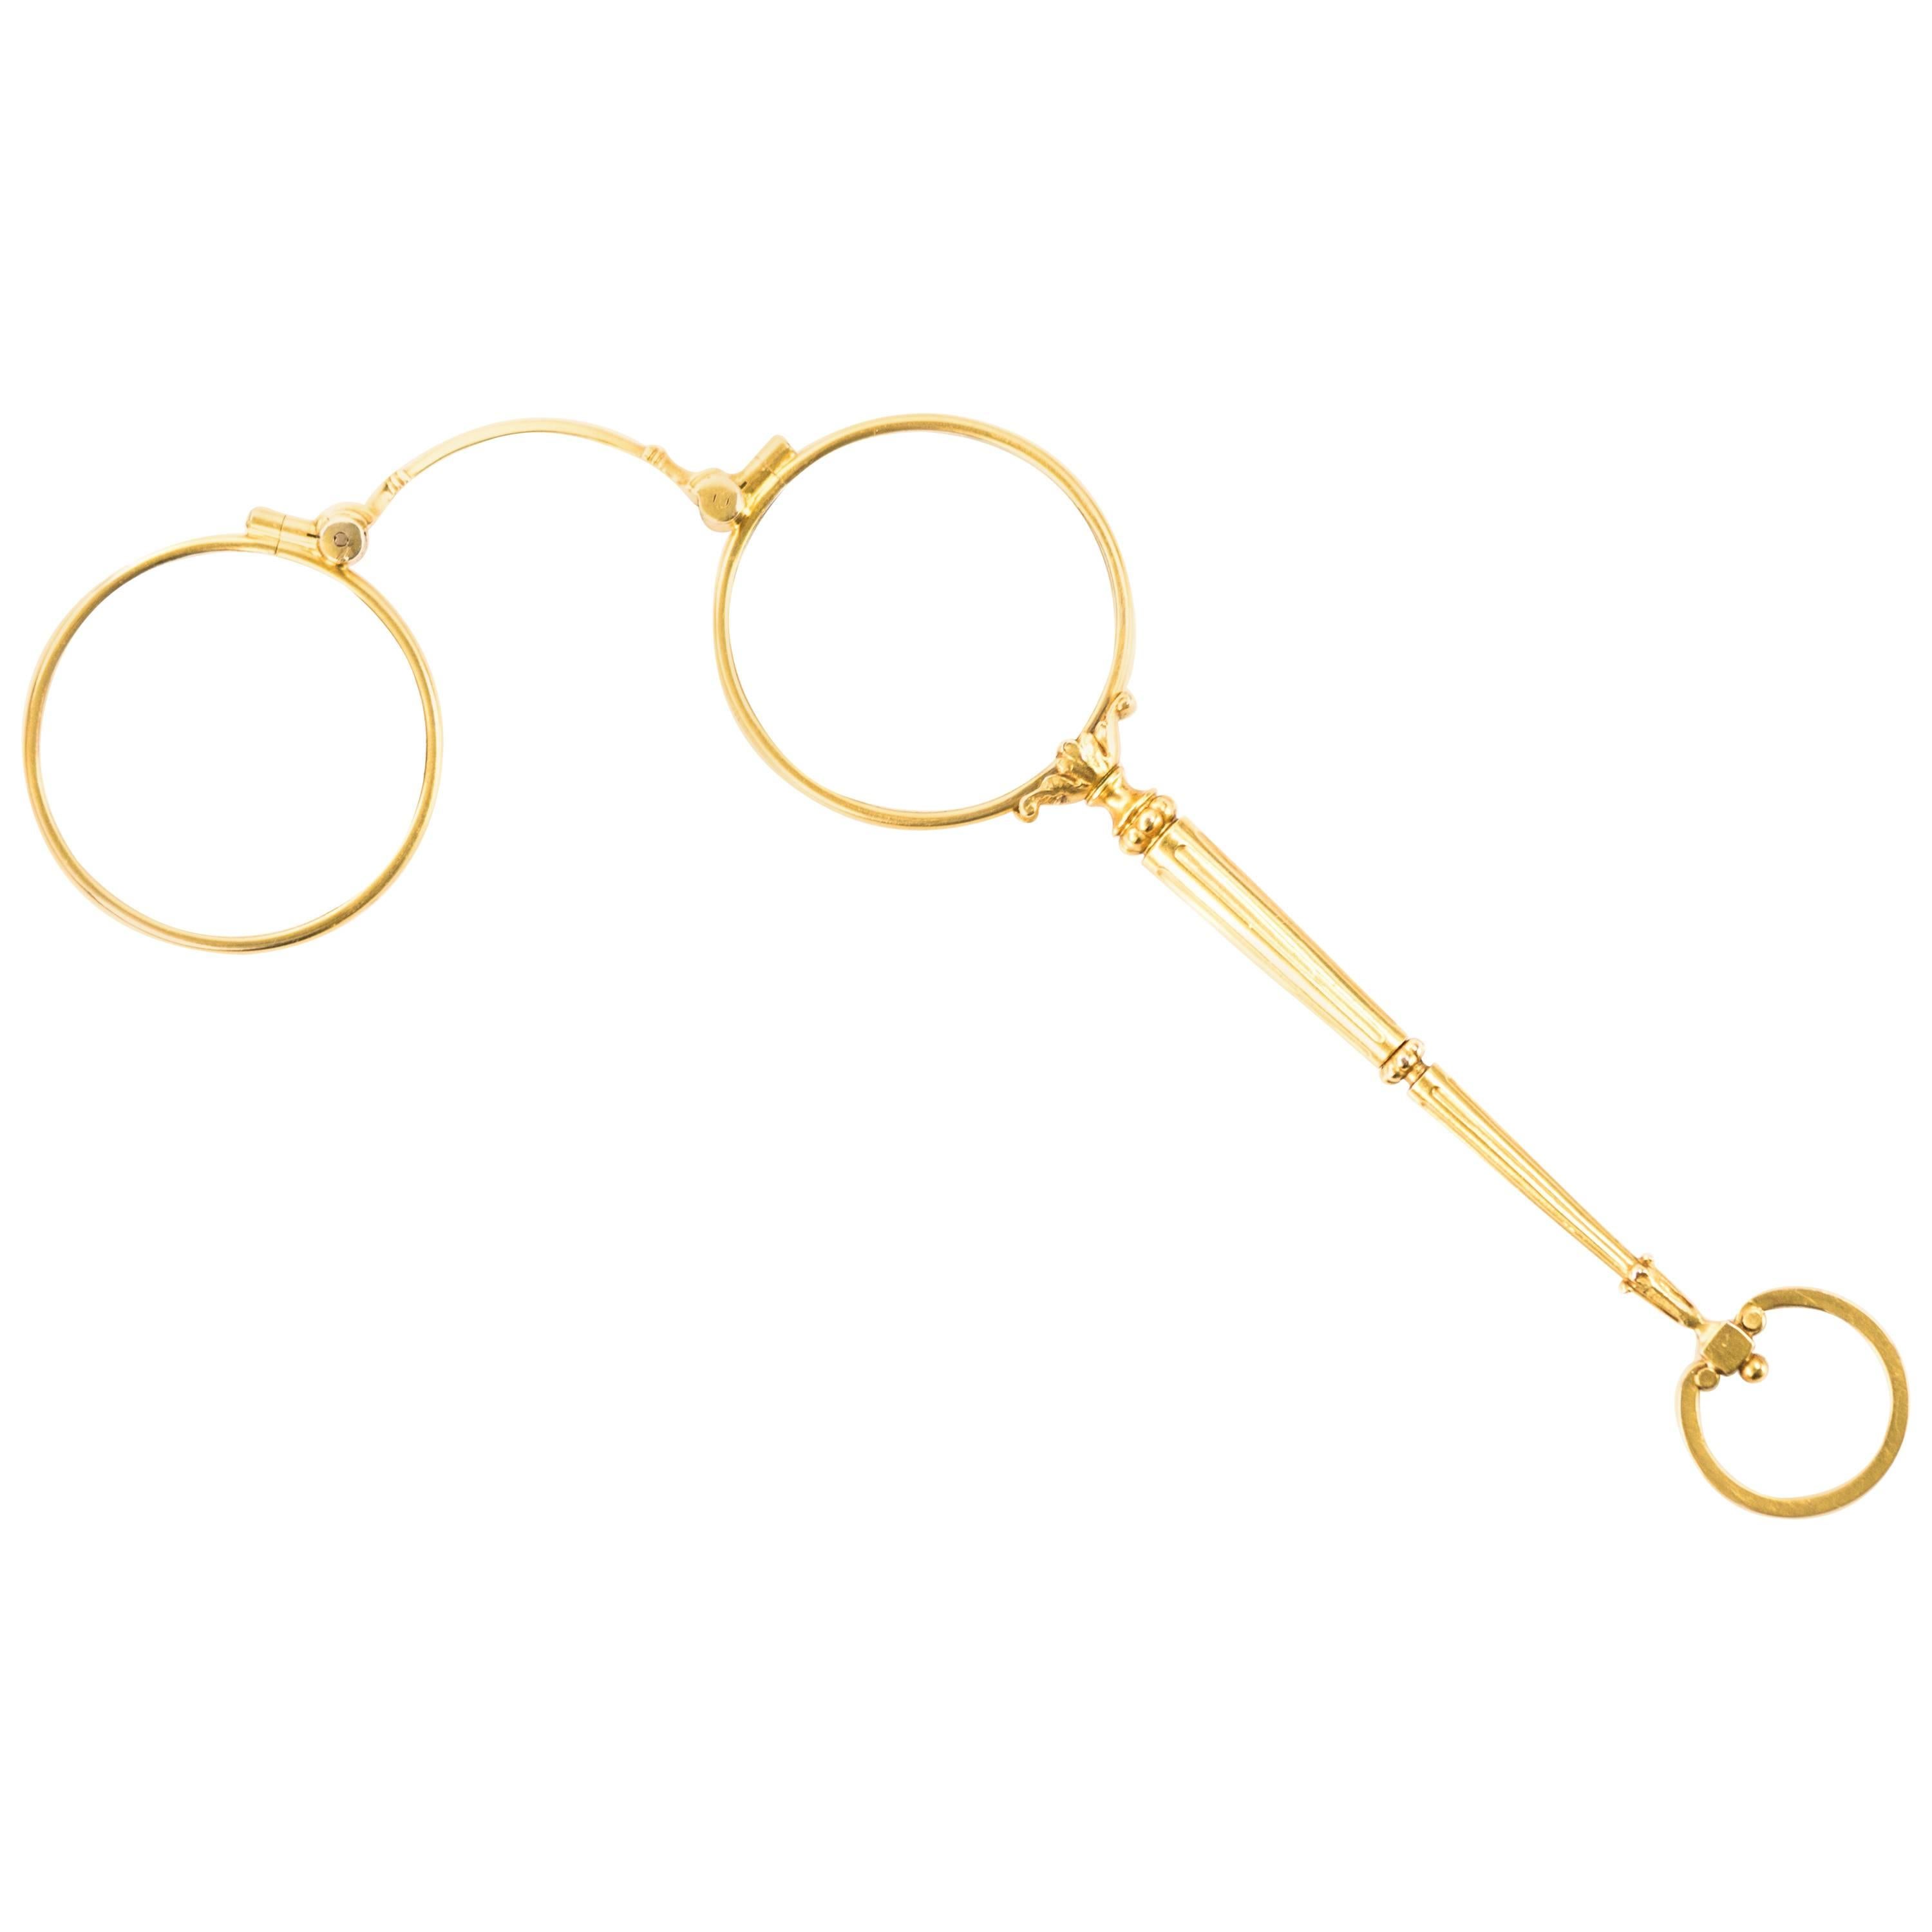 Curry and Paxton Lorgnette Bifocal 14K Gold Spectacles